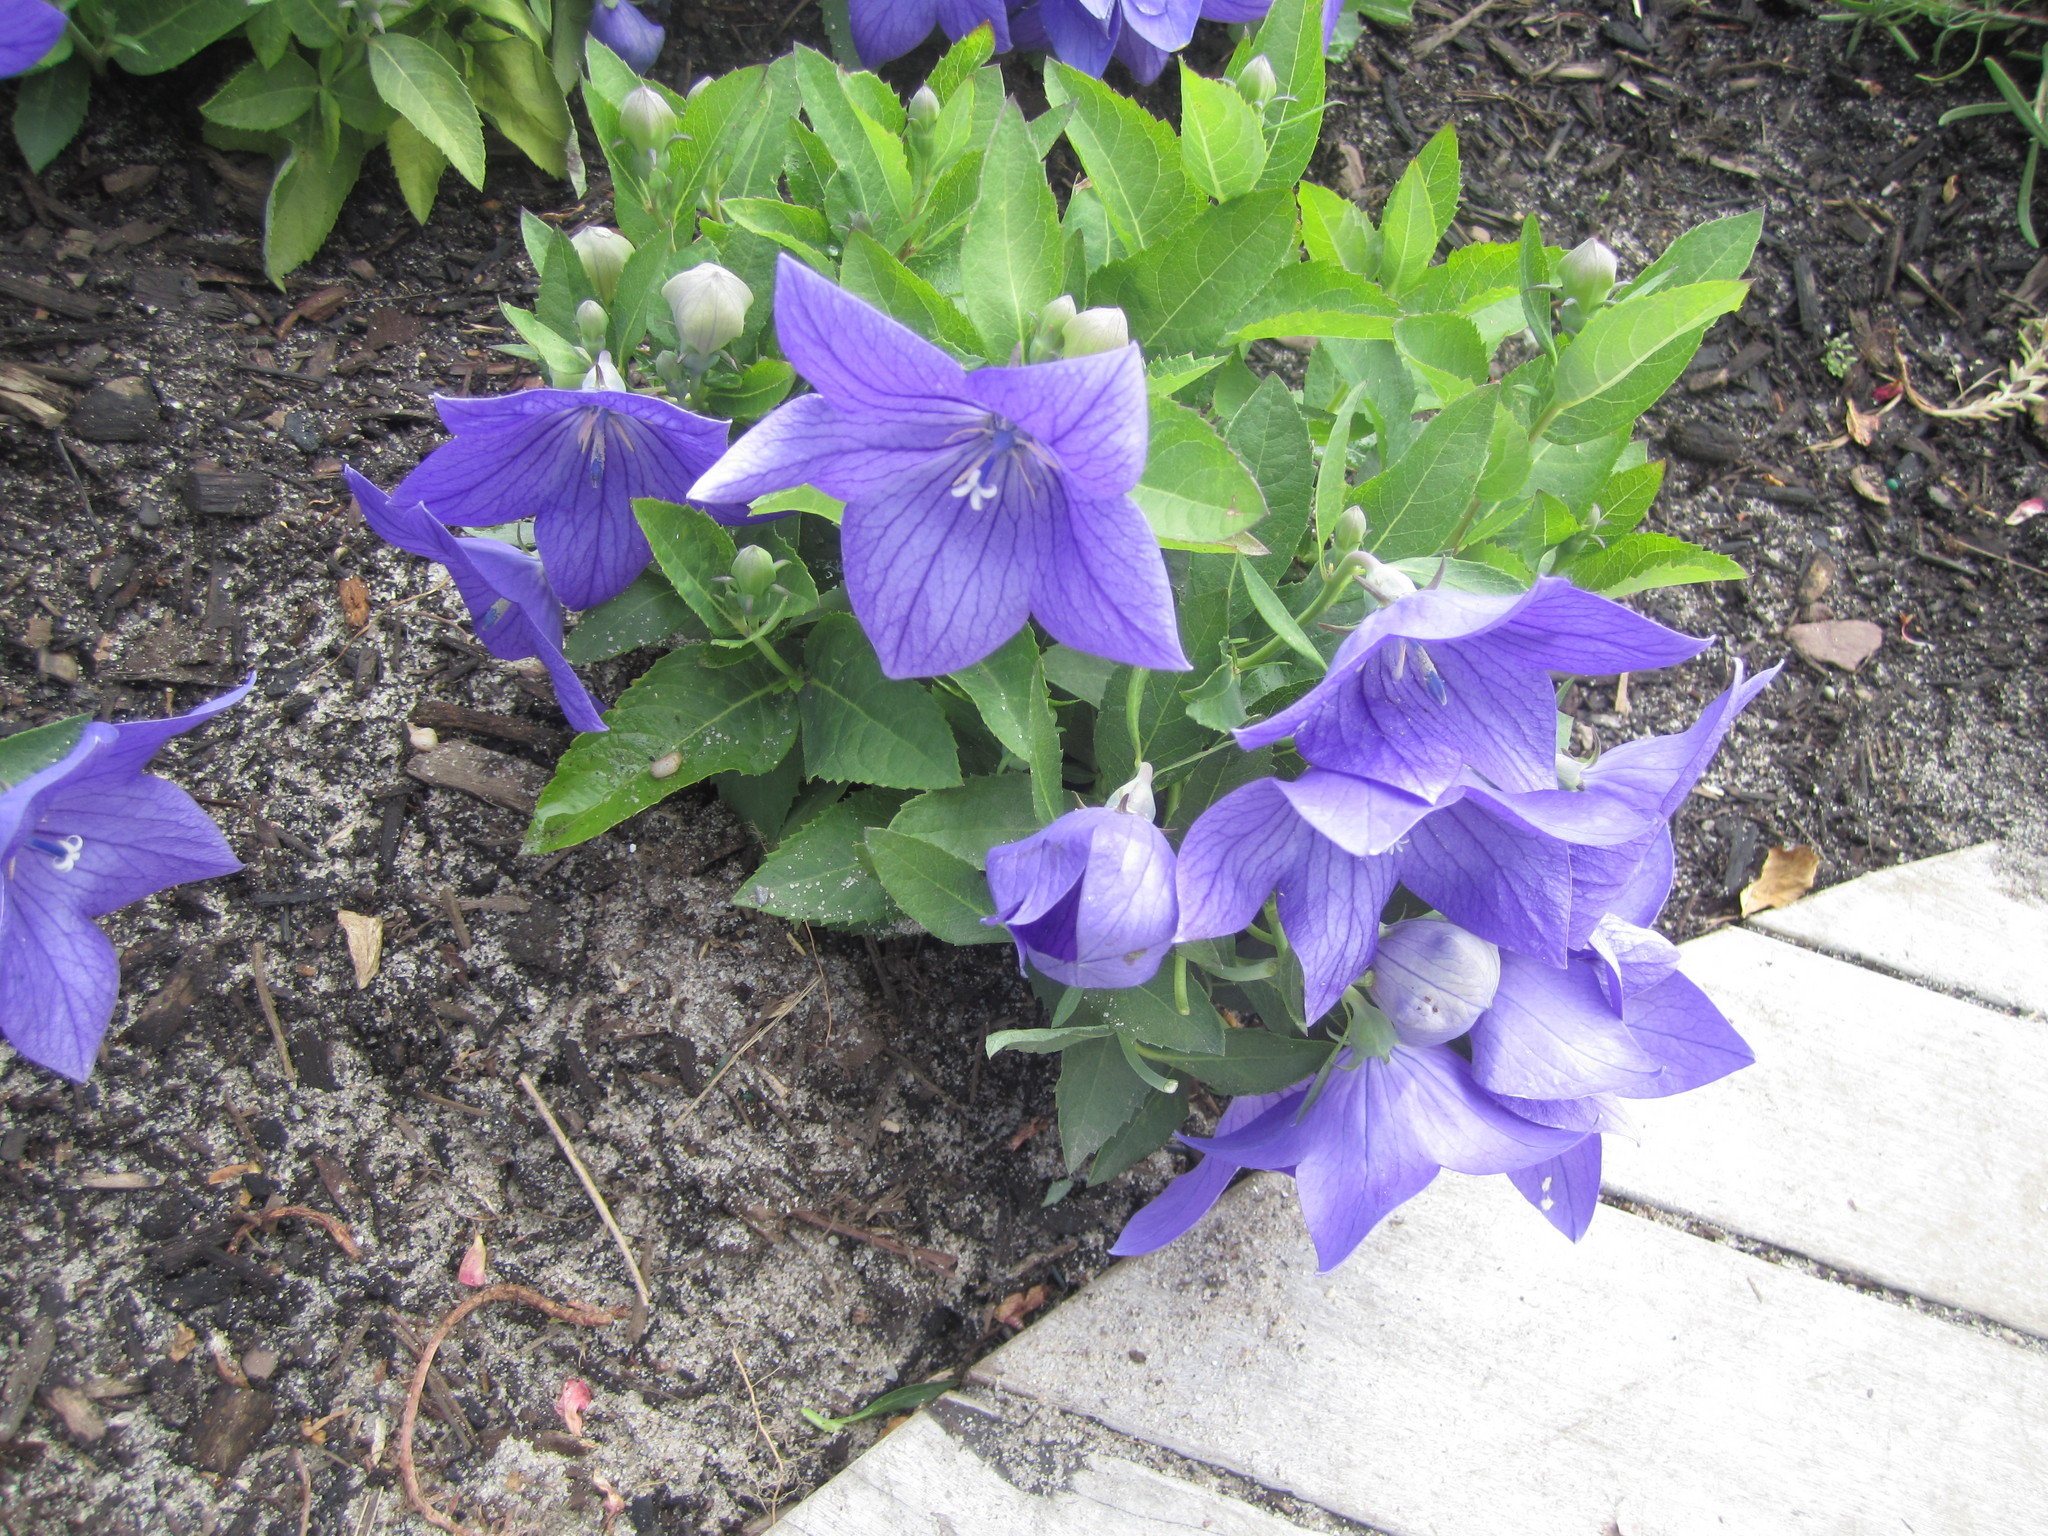 Balloon flowers are care-free summer bloomers | SILive.com